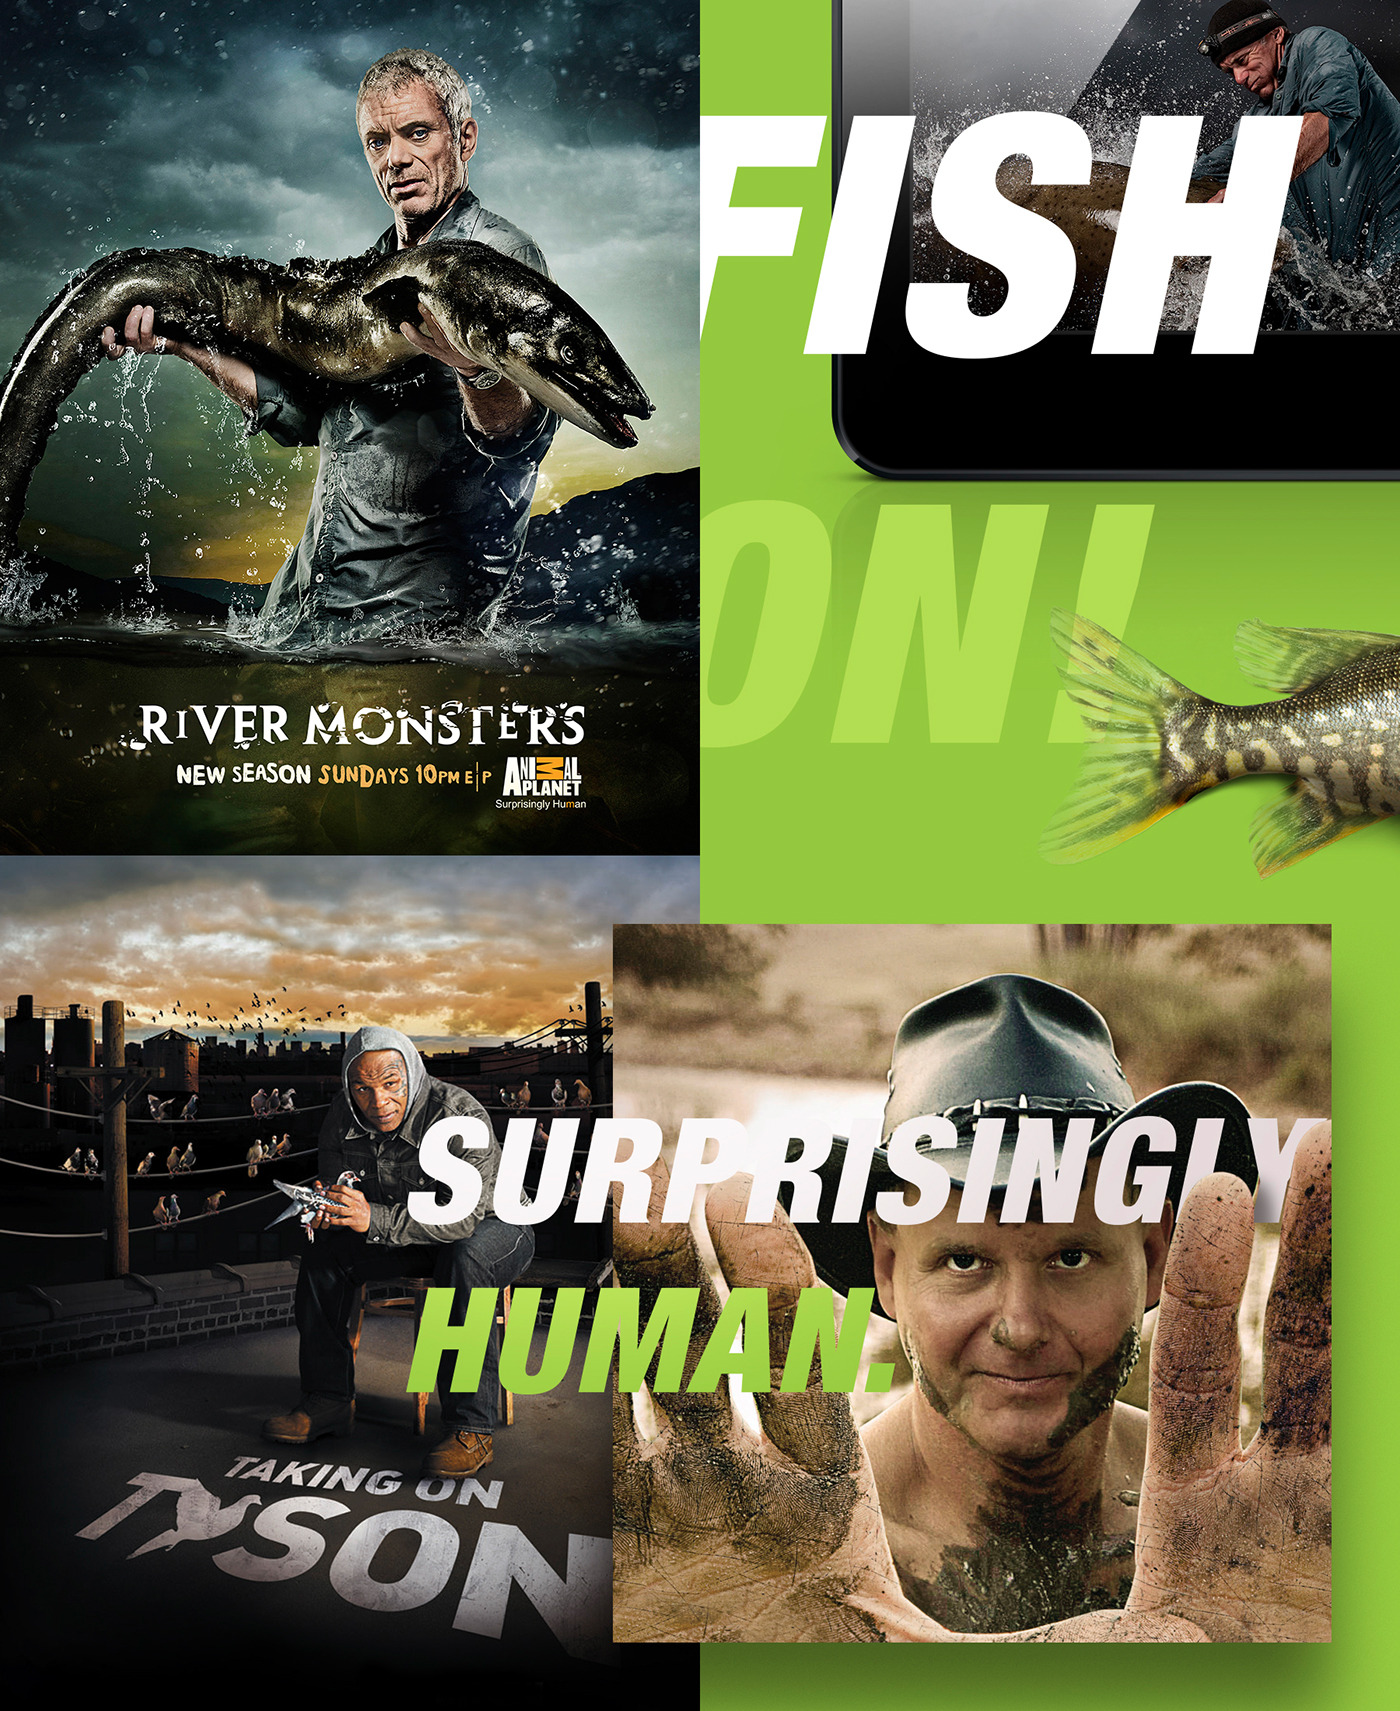 discovery Discovery Channel Animal Planet television broadcast keyart Shark Week shark fish comite network Gold Rush reality brand